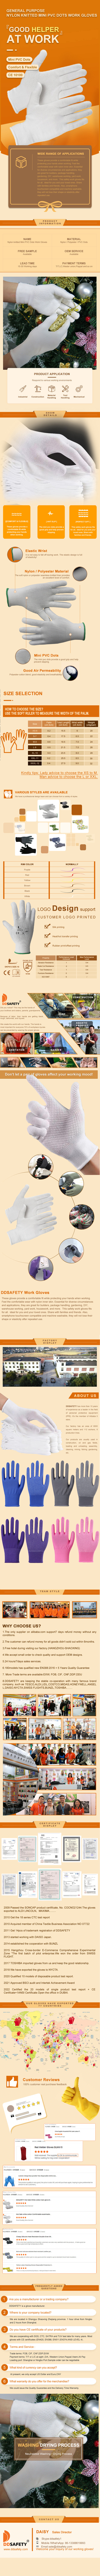 13 Gauge Nylon Polyester Seamless Hand Work Gloves With White Pvc Dots One Side - DKP413 13 Gauge Nylon Polyester Seamless Hand Work Gloves With White Pvc Dots One Side - DKP413 gloves,work gloves,hand gloves,nylon gloves,pvc dots gloves